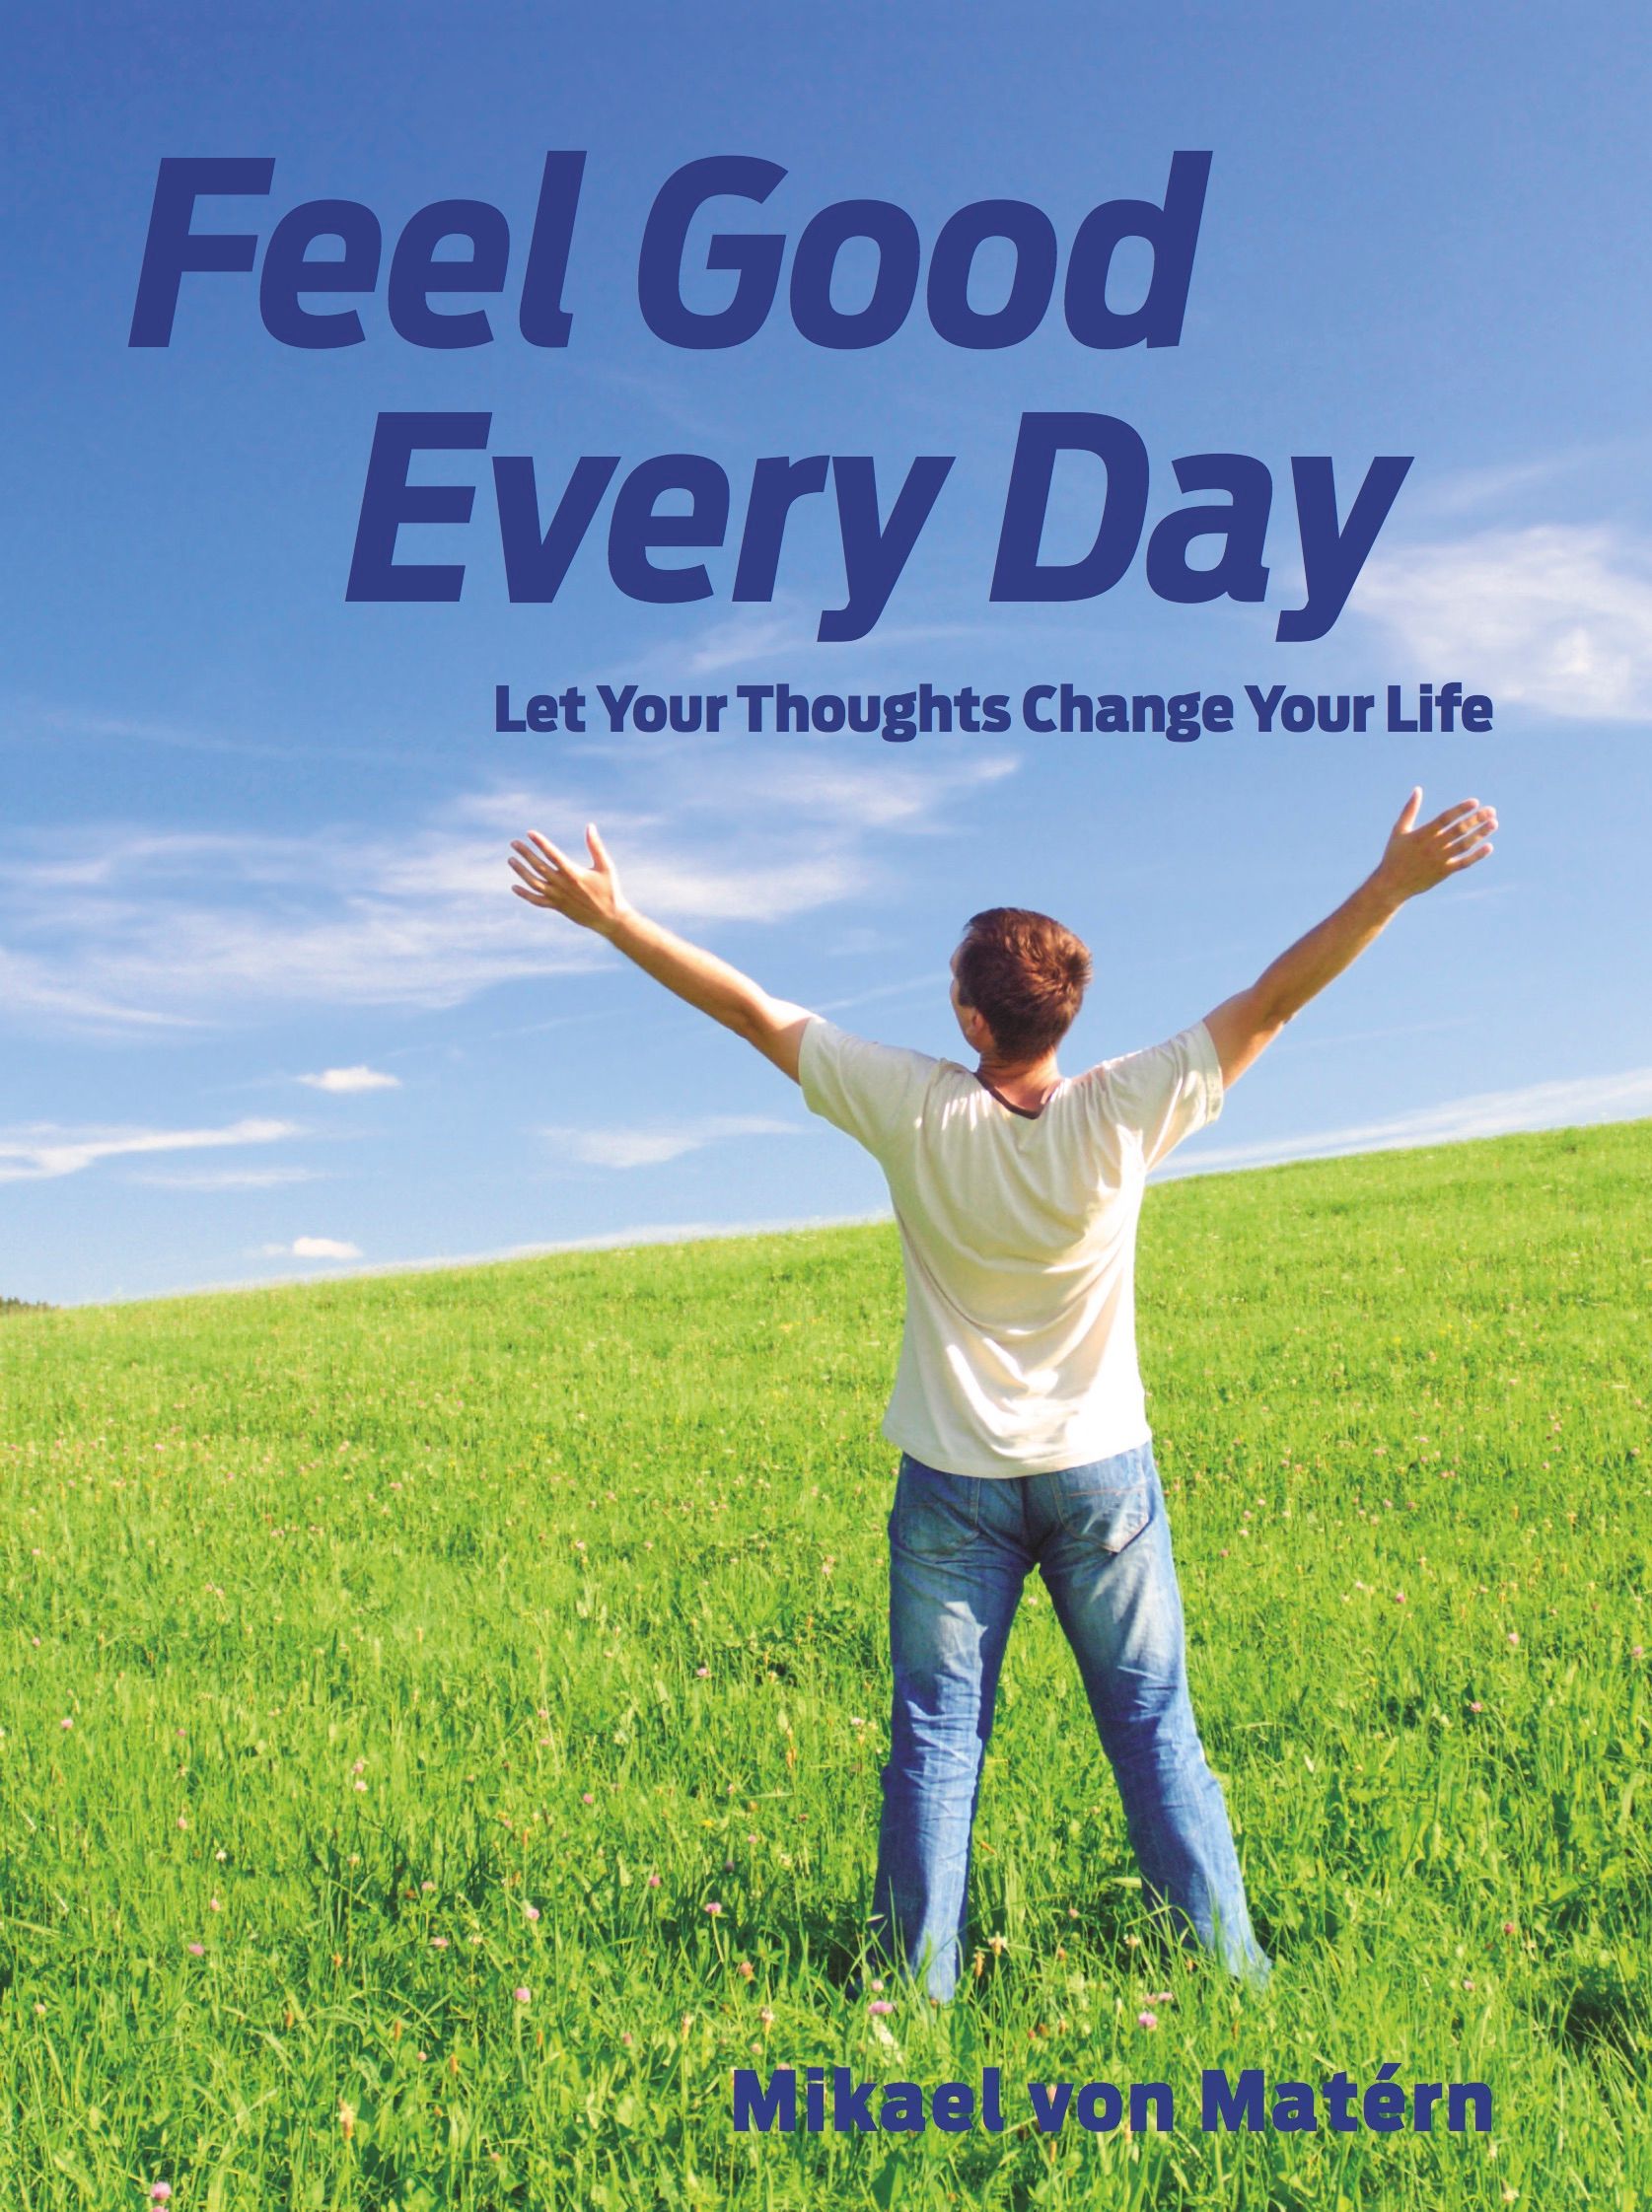 Feel Good Every Day - Let Your Thoughts Change Your Life, eBook by Mikael von Matérn